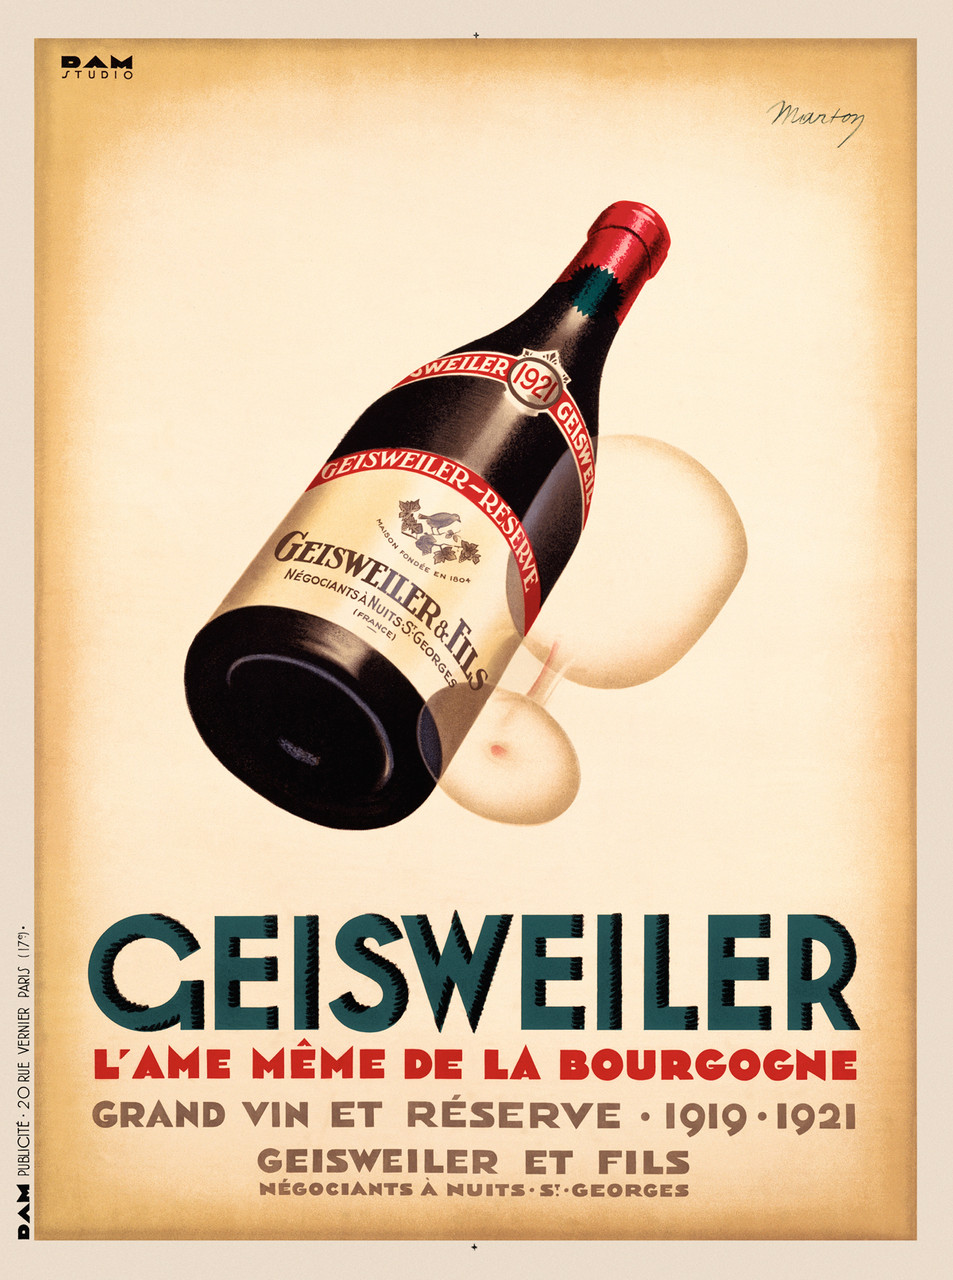 Geisweiler Grand Vin poster by Marton 1921 France - Beautiful Vintage Poster Reproduction. This French wine and spirits poster features a simple image of a bottle laying back on an angle with a ghost of a glass next to it. Giclee Advertising Prints. Classic Posters